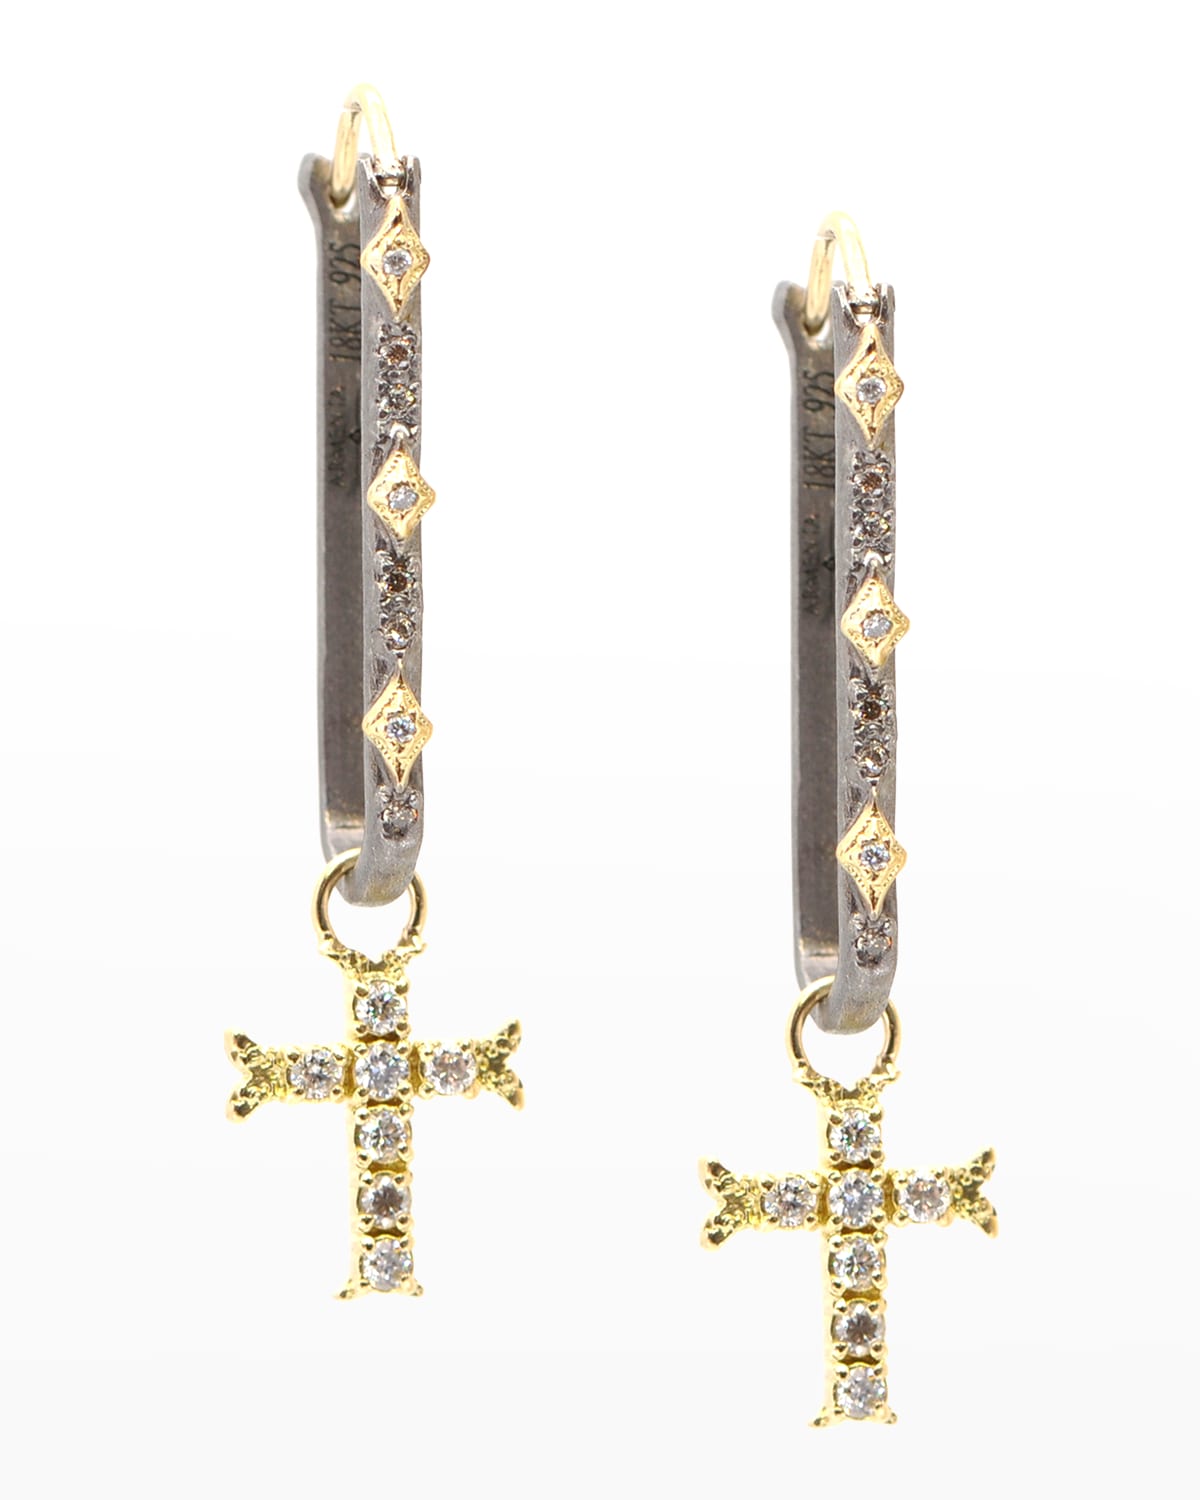 Old World 26mm Paperclip Earrings with Pave Cross Drops